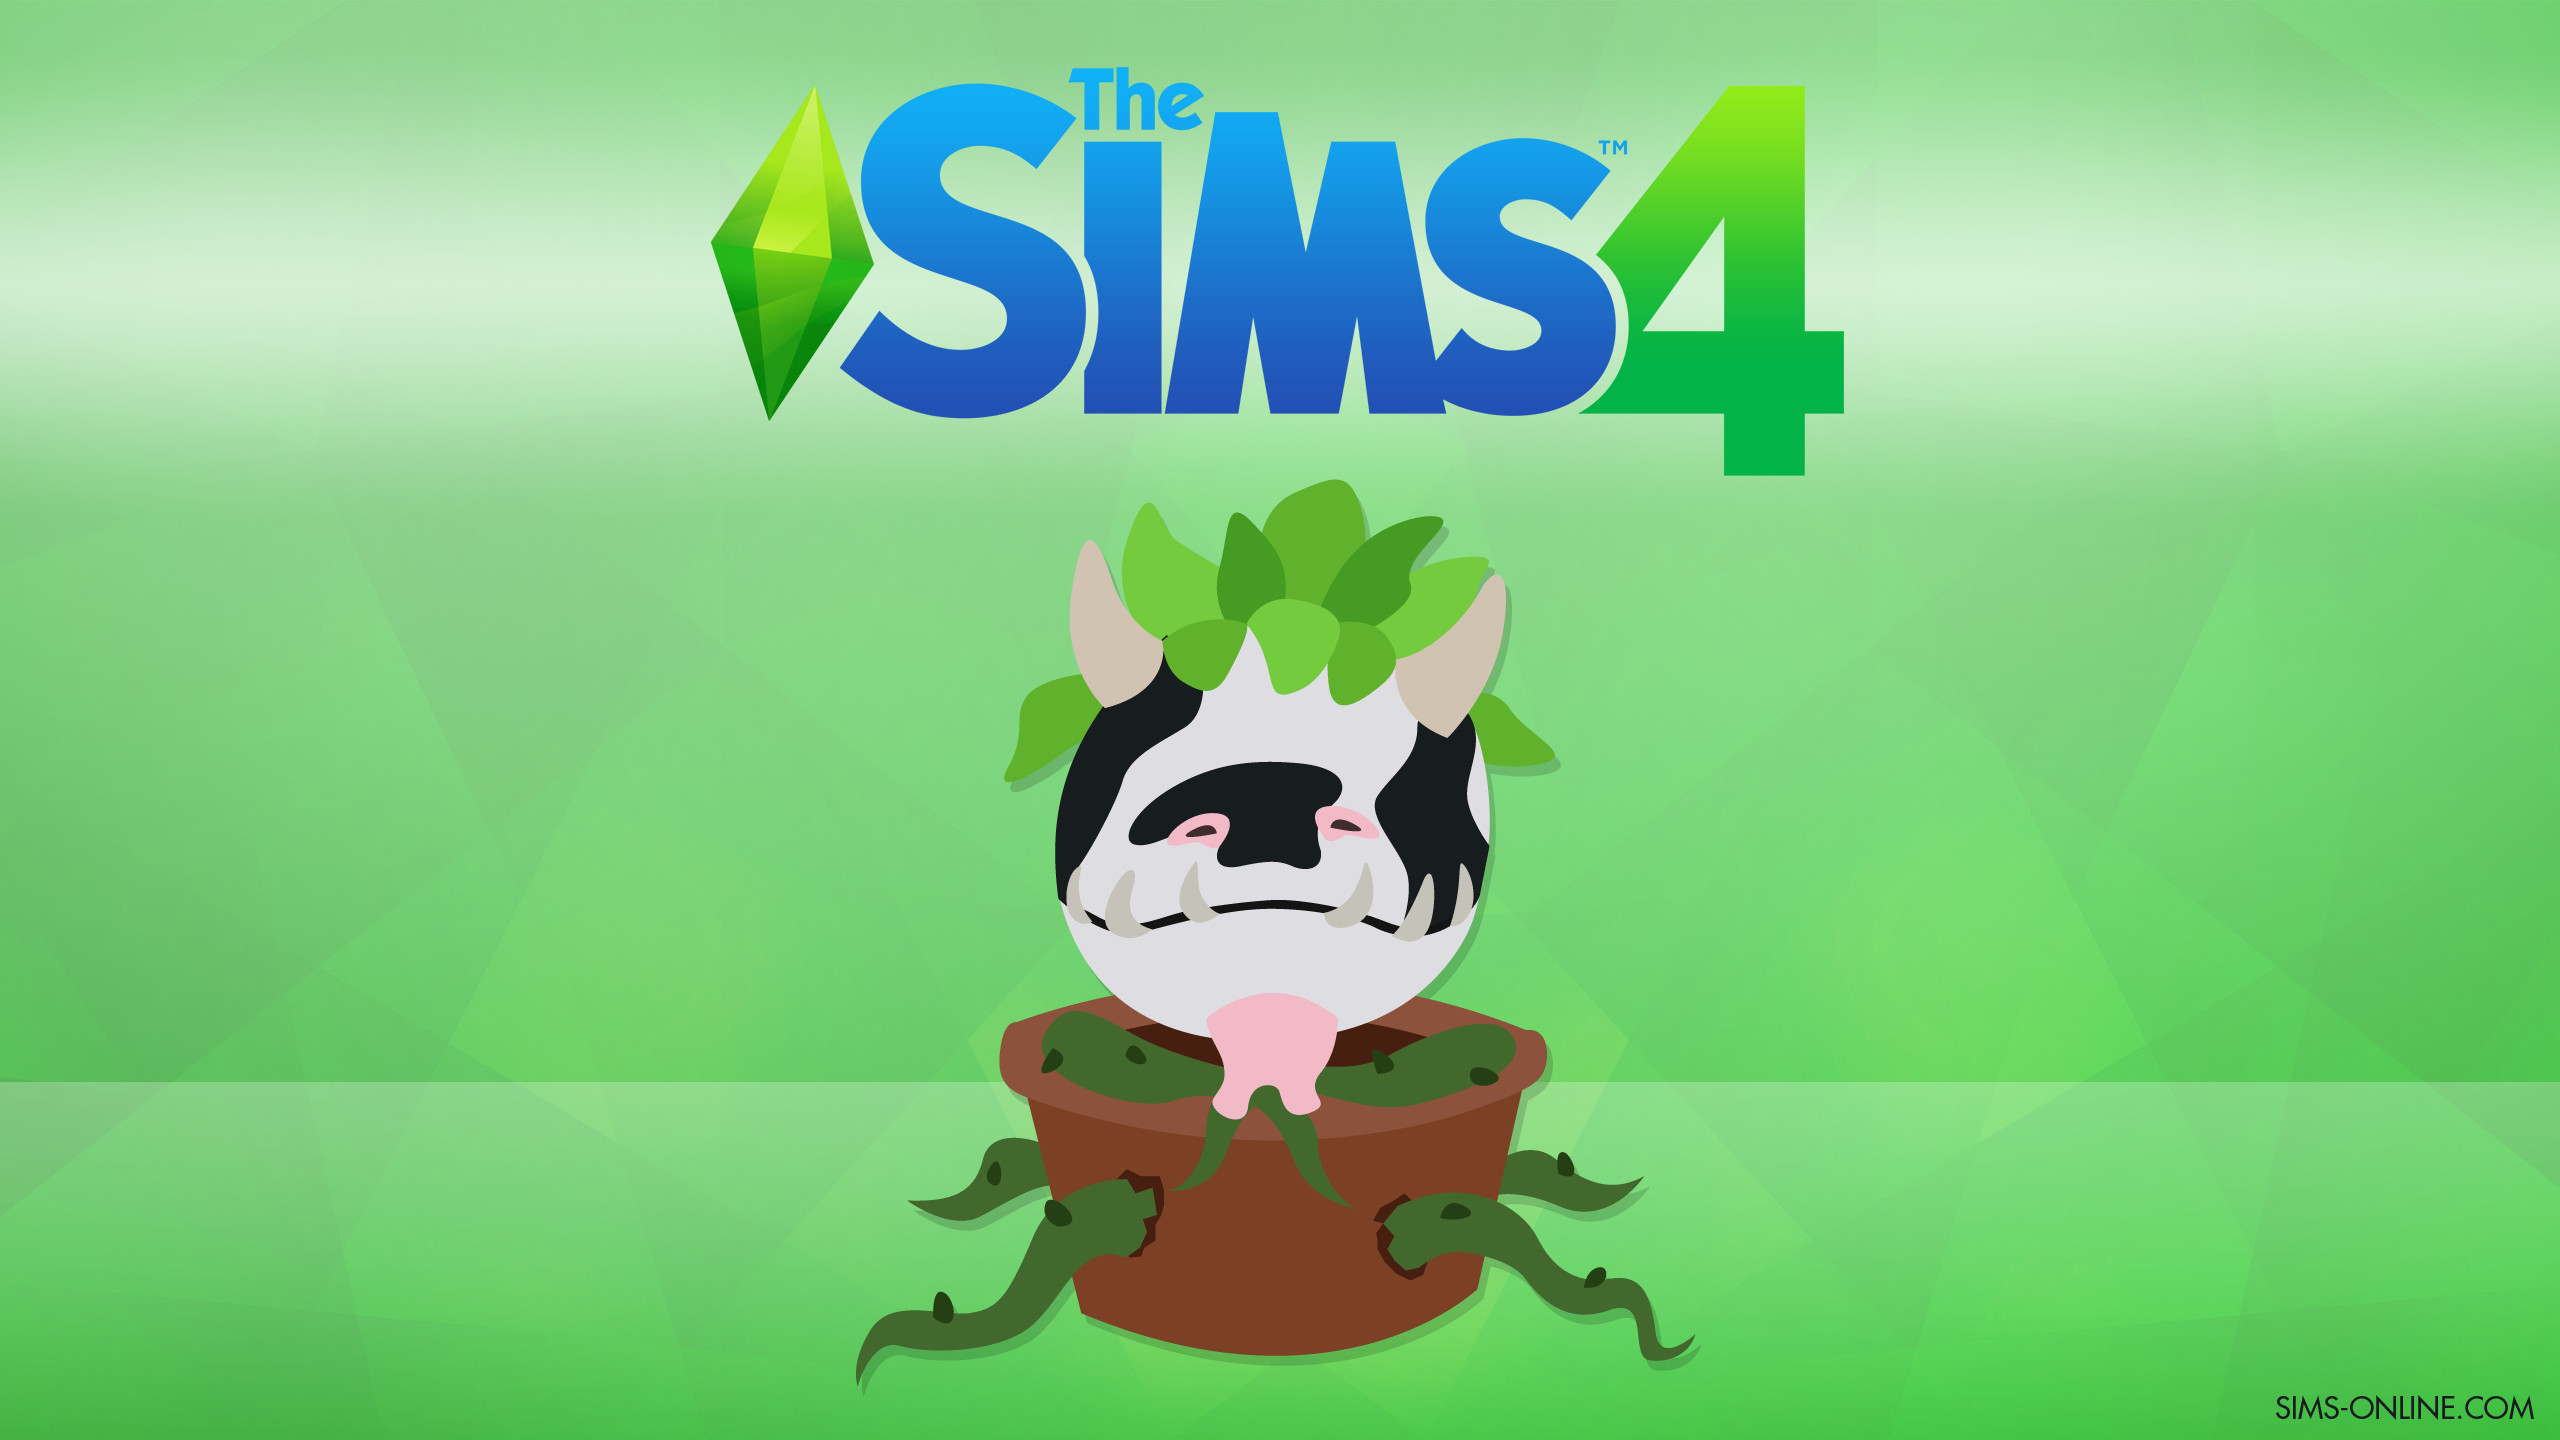 2560x1440 The Sims 4 Cow Plant Wallpaper Sims News Pinterest 